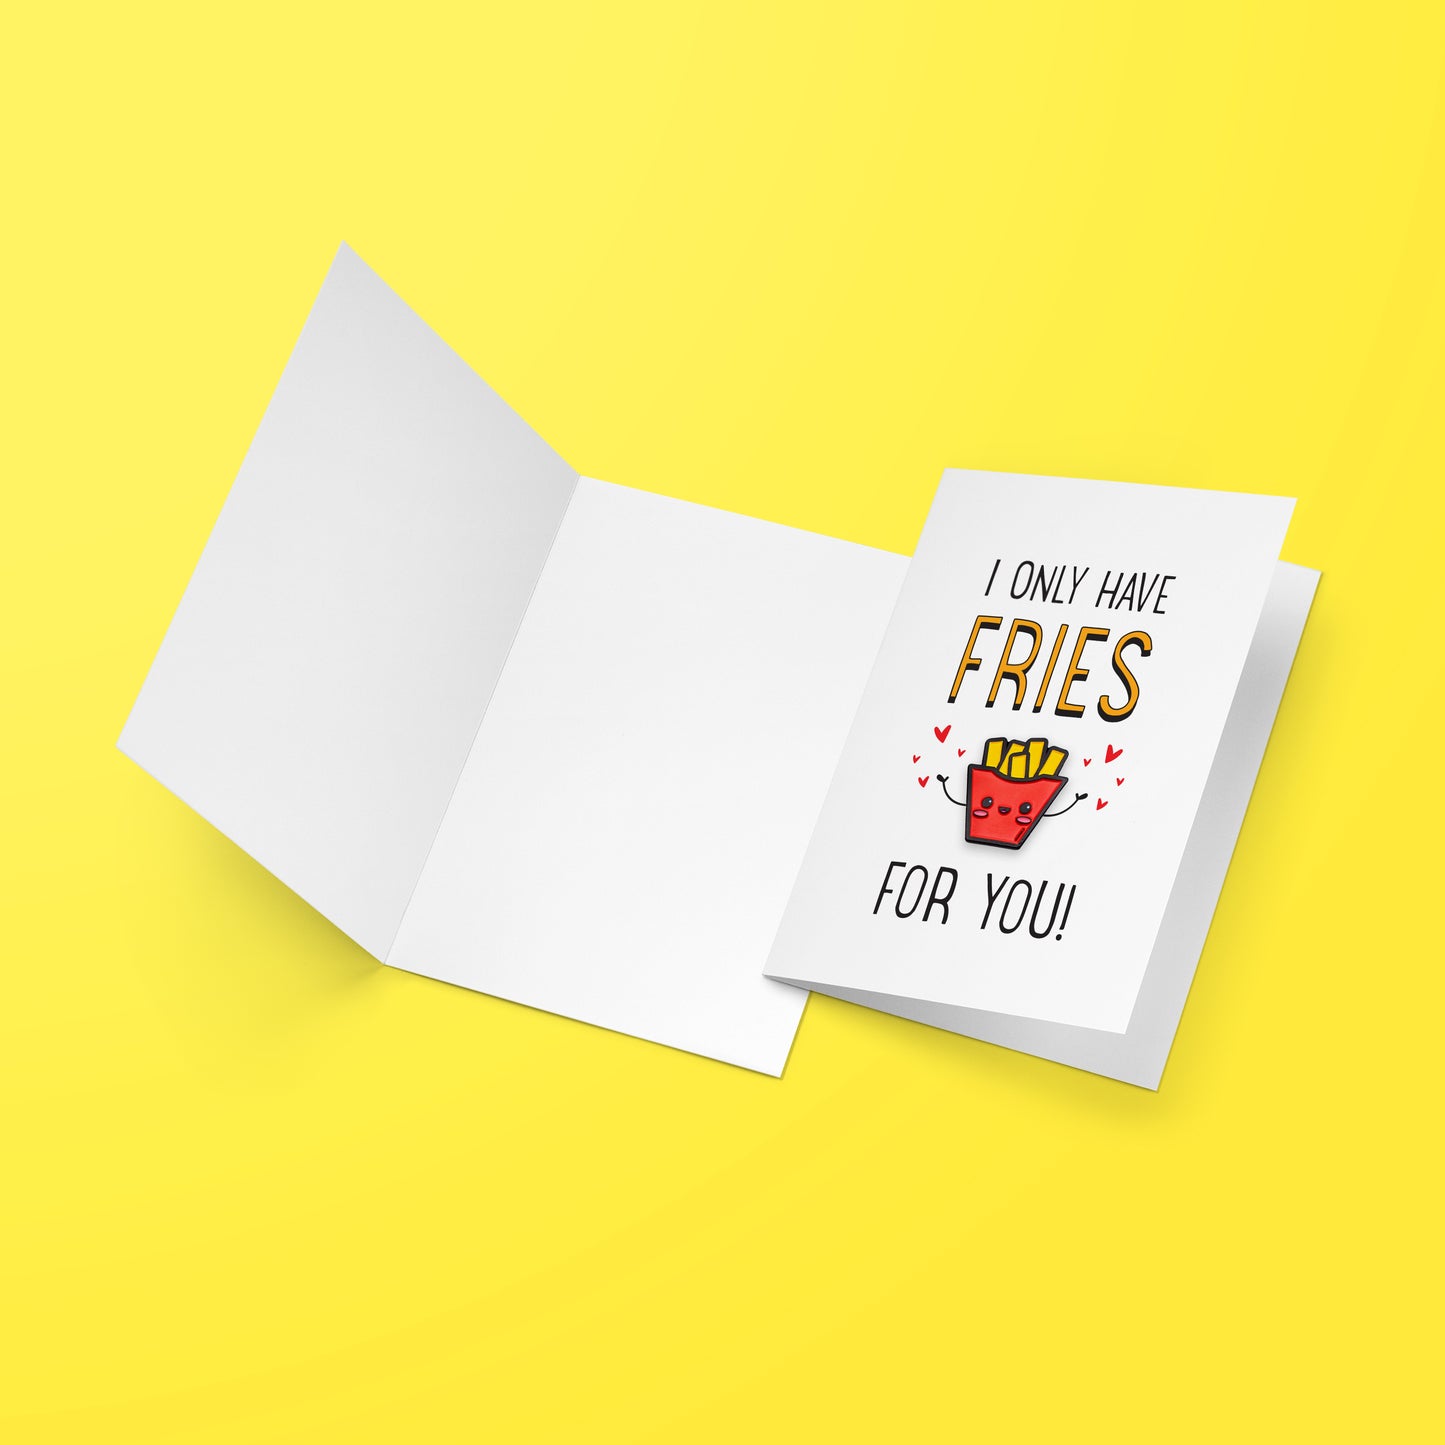 I Only Have Fries For You greeting card opened on yellow background